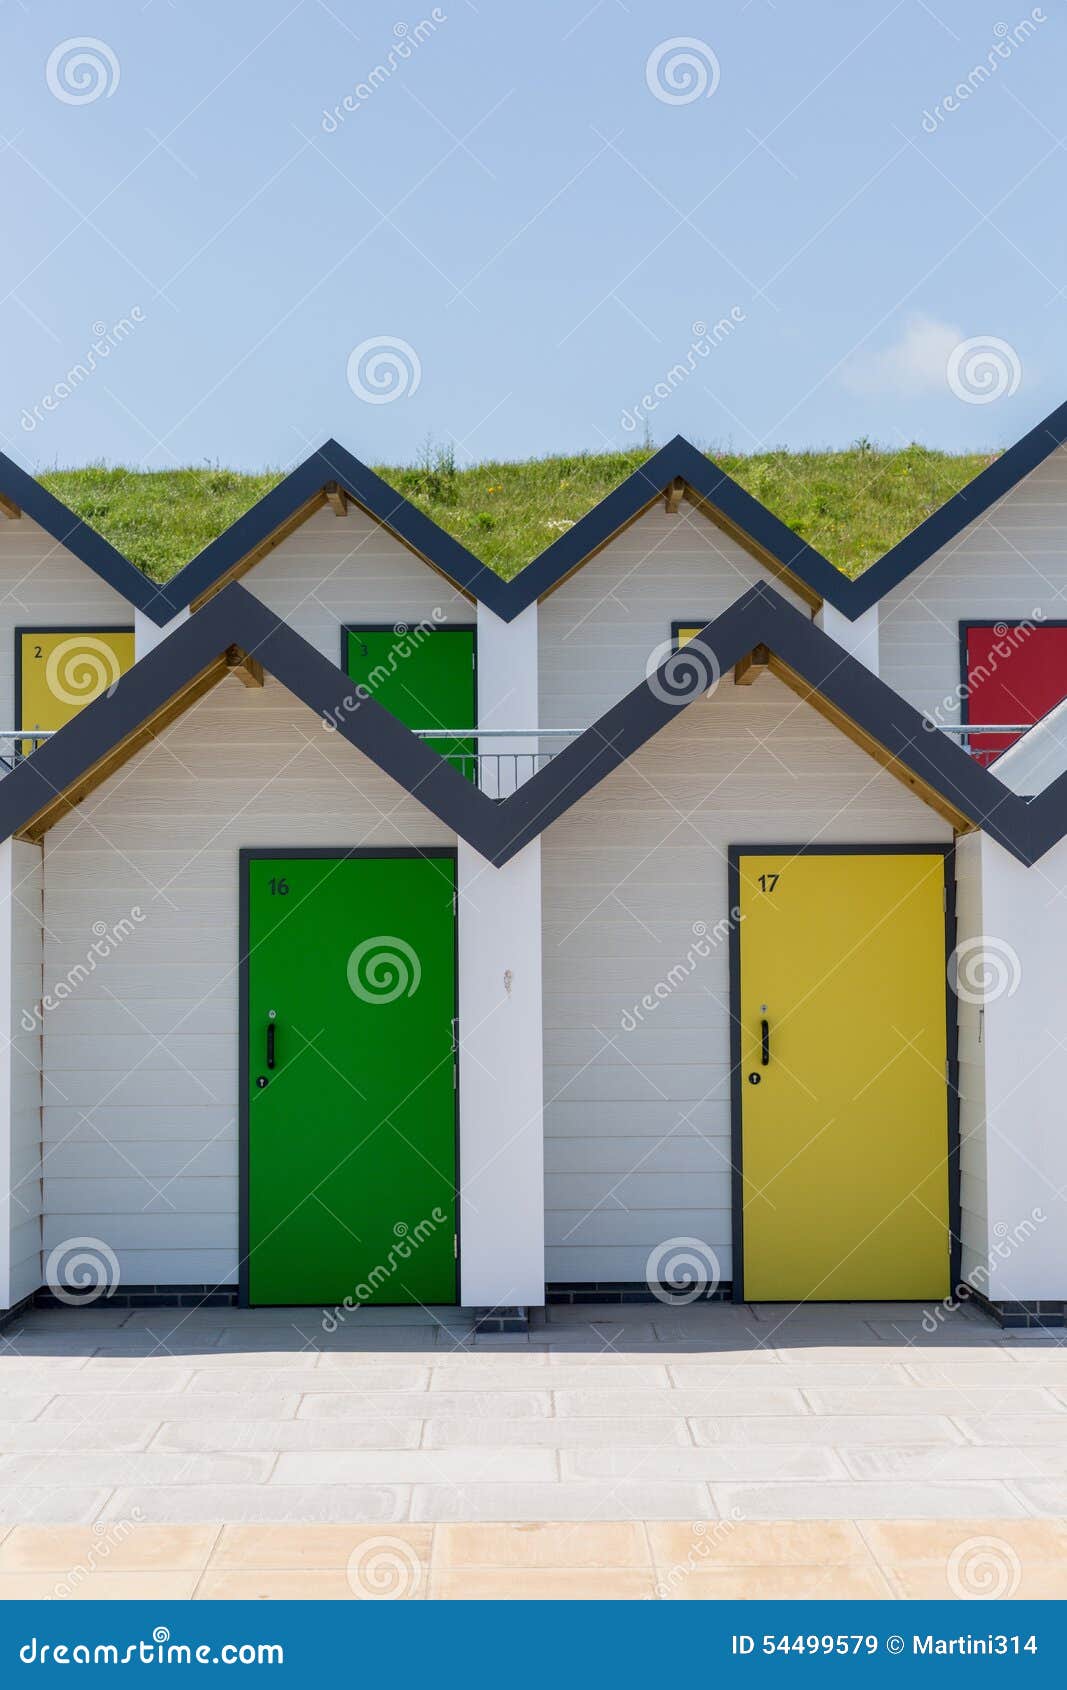 Colourful doors of yellow and green, with each one being numbered individually, of white beach houses on a sunny day in Swanage, Dorset, England